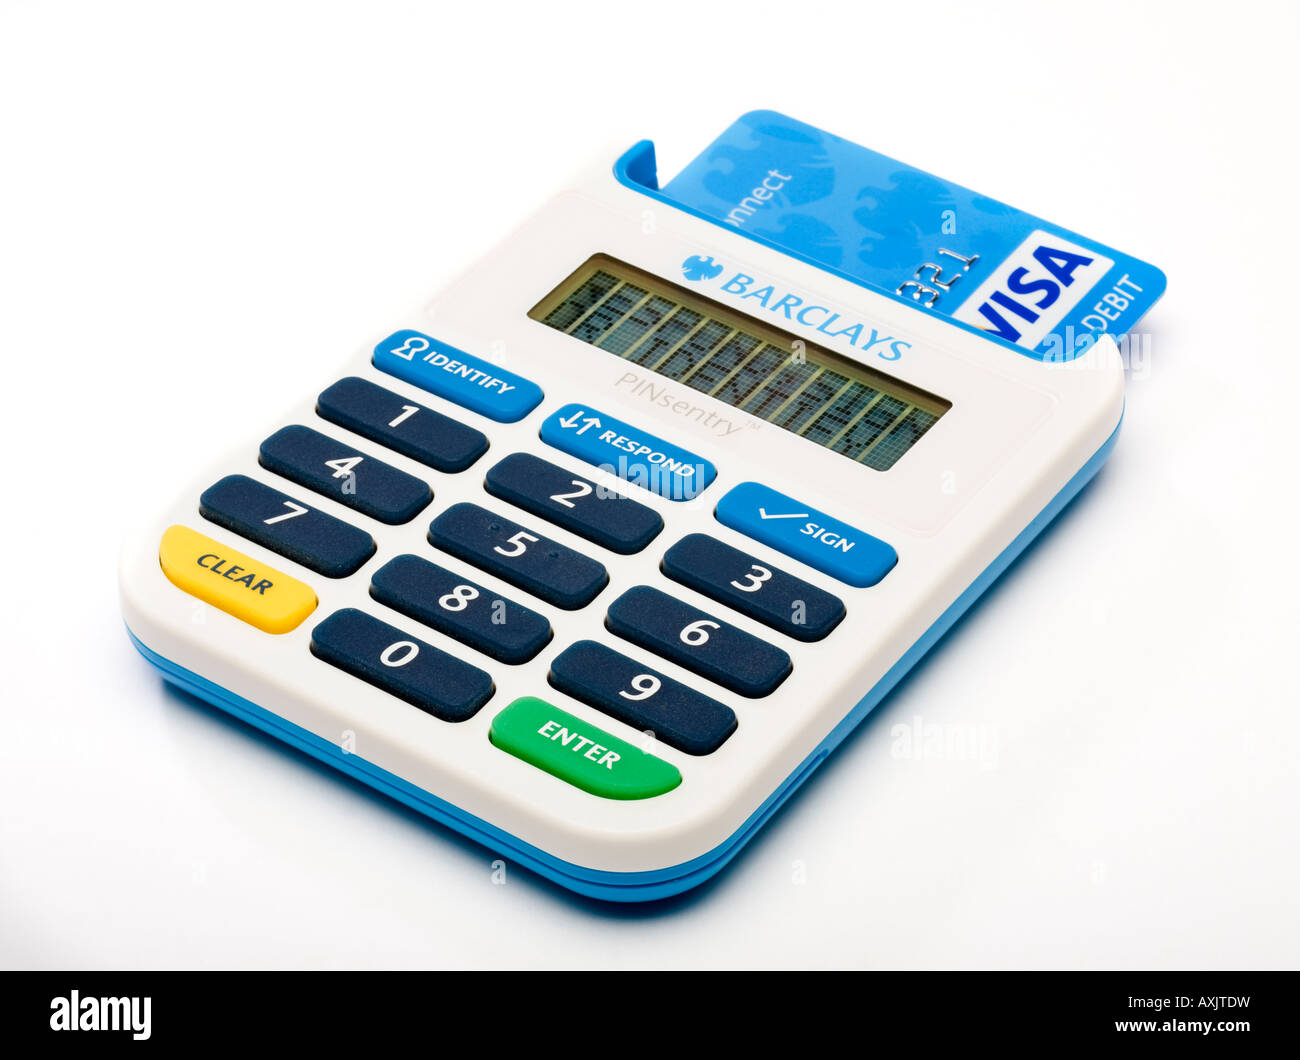 Barclays Bank Pin Sentry chip and pin debit card reader that generates random number to prevent online banking fraud Stock Photo